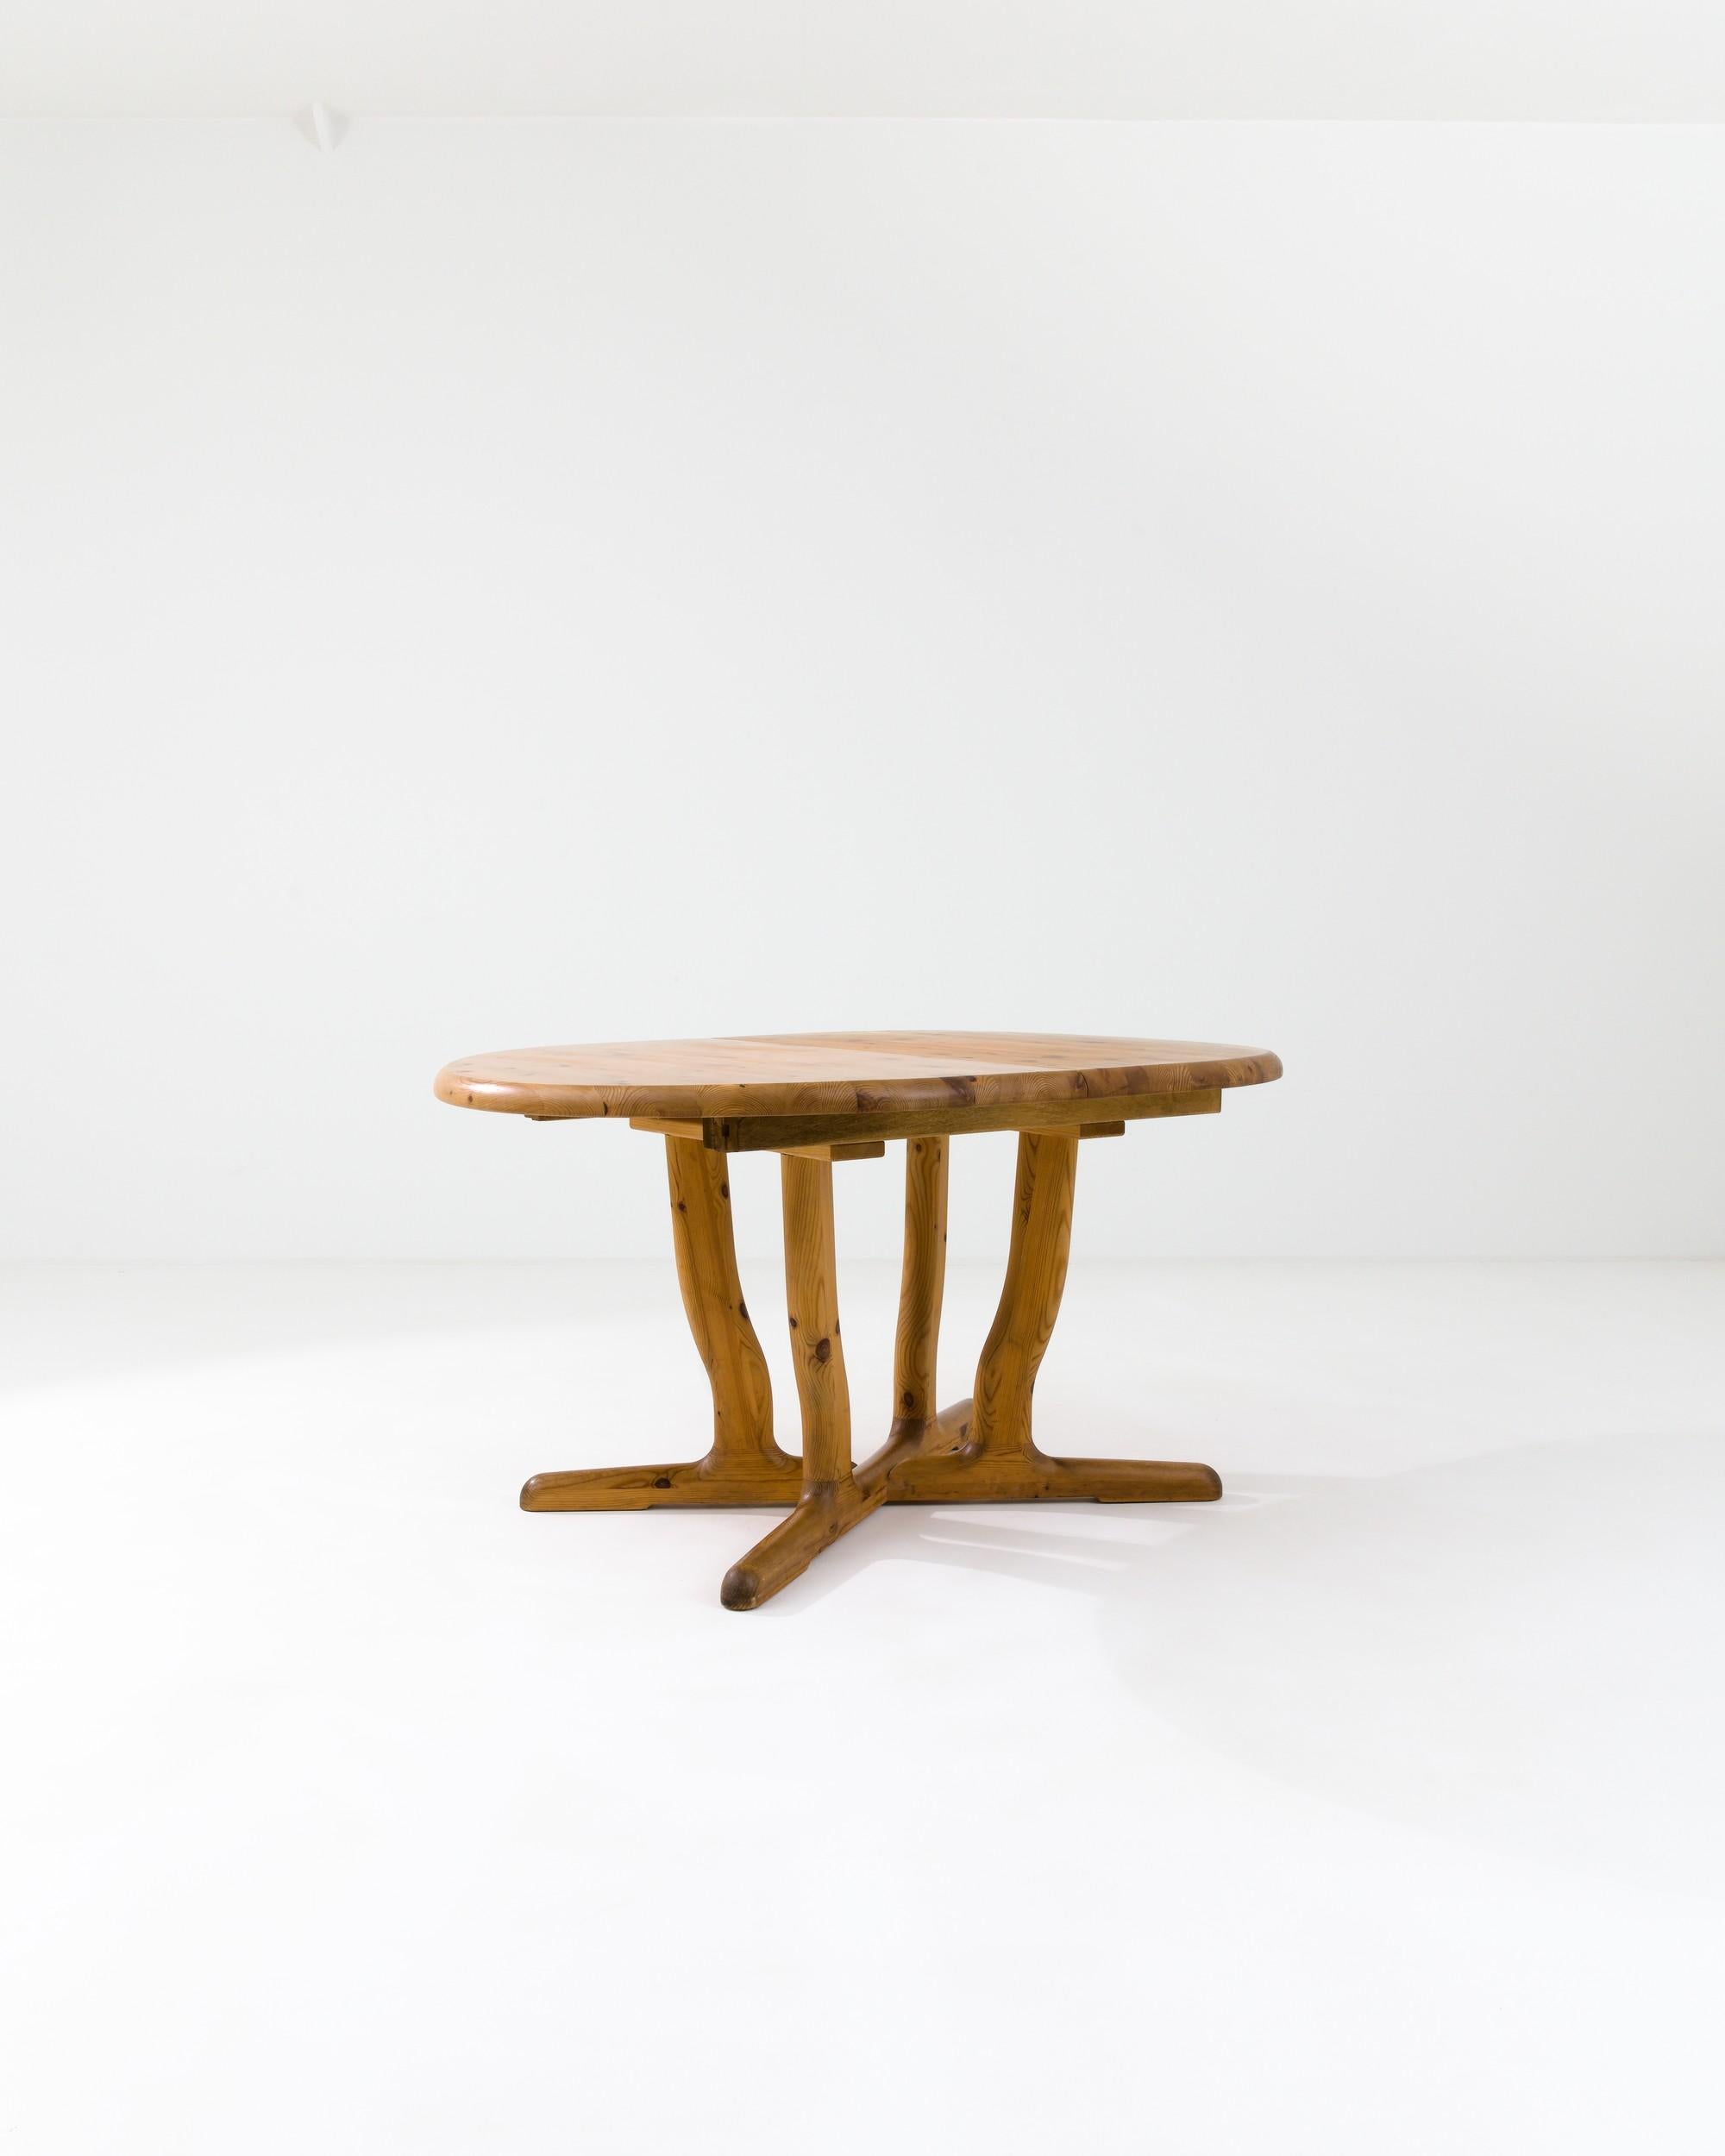 This stylish vintage table, crafted in 20th-century Scandinavia, exudes a sense of fluidity. Its slightly curved legs are enhanced by mesmerizing wood grain naturally ornamented with captivating patterns. Supported by an ‘X’ shaped base, the